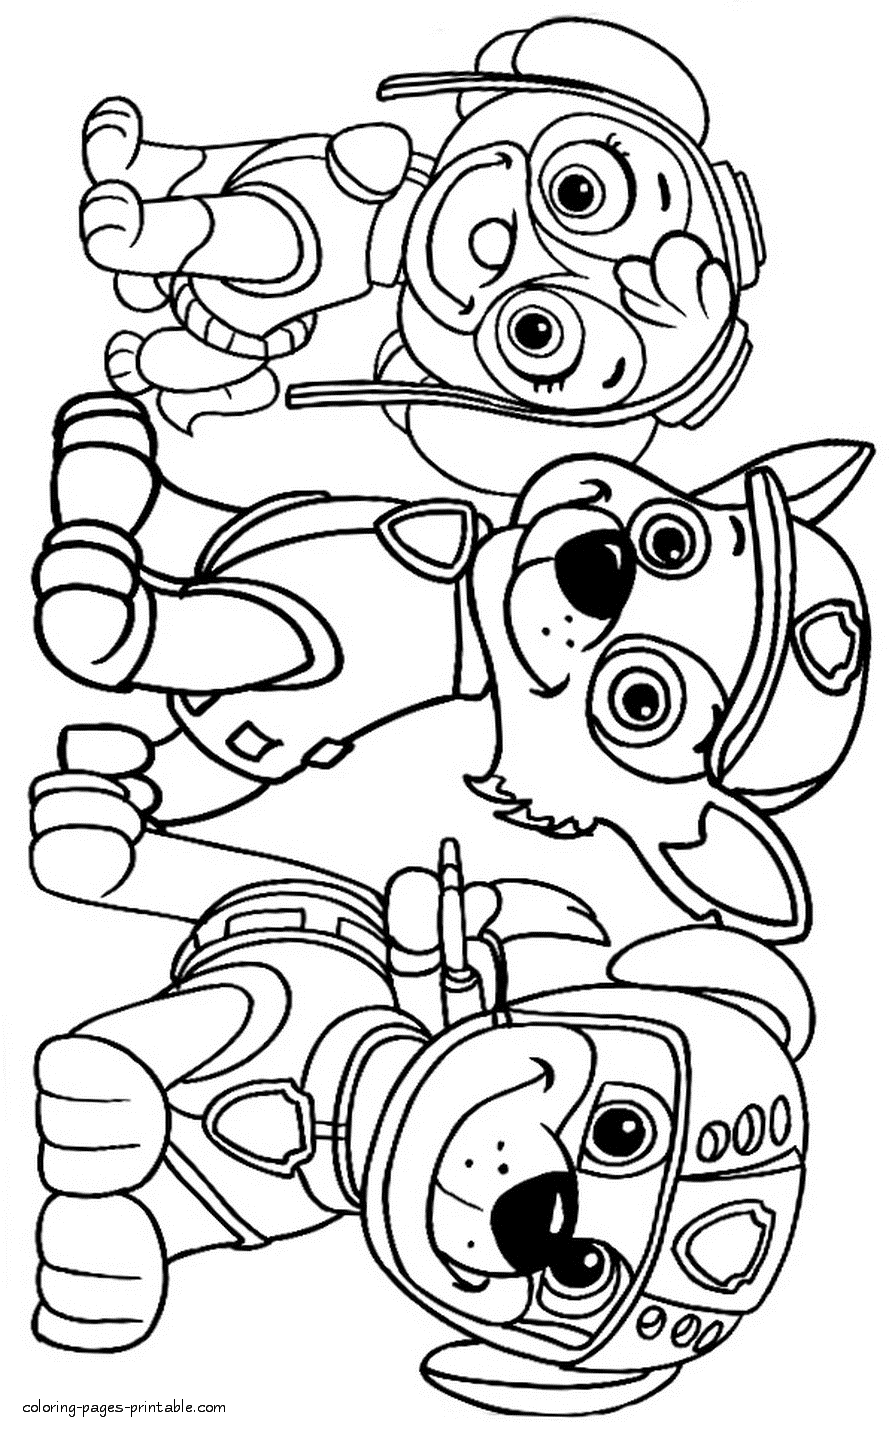 Download Free Kids Coloring Pages Paw Patrol Coloring Pages Printable Com